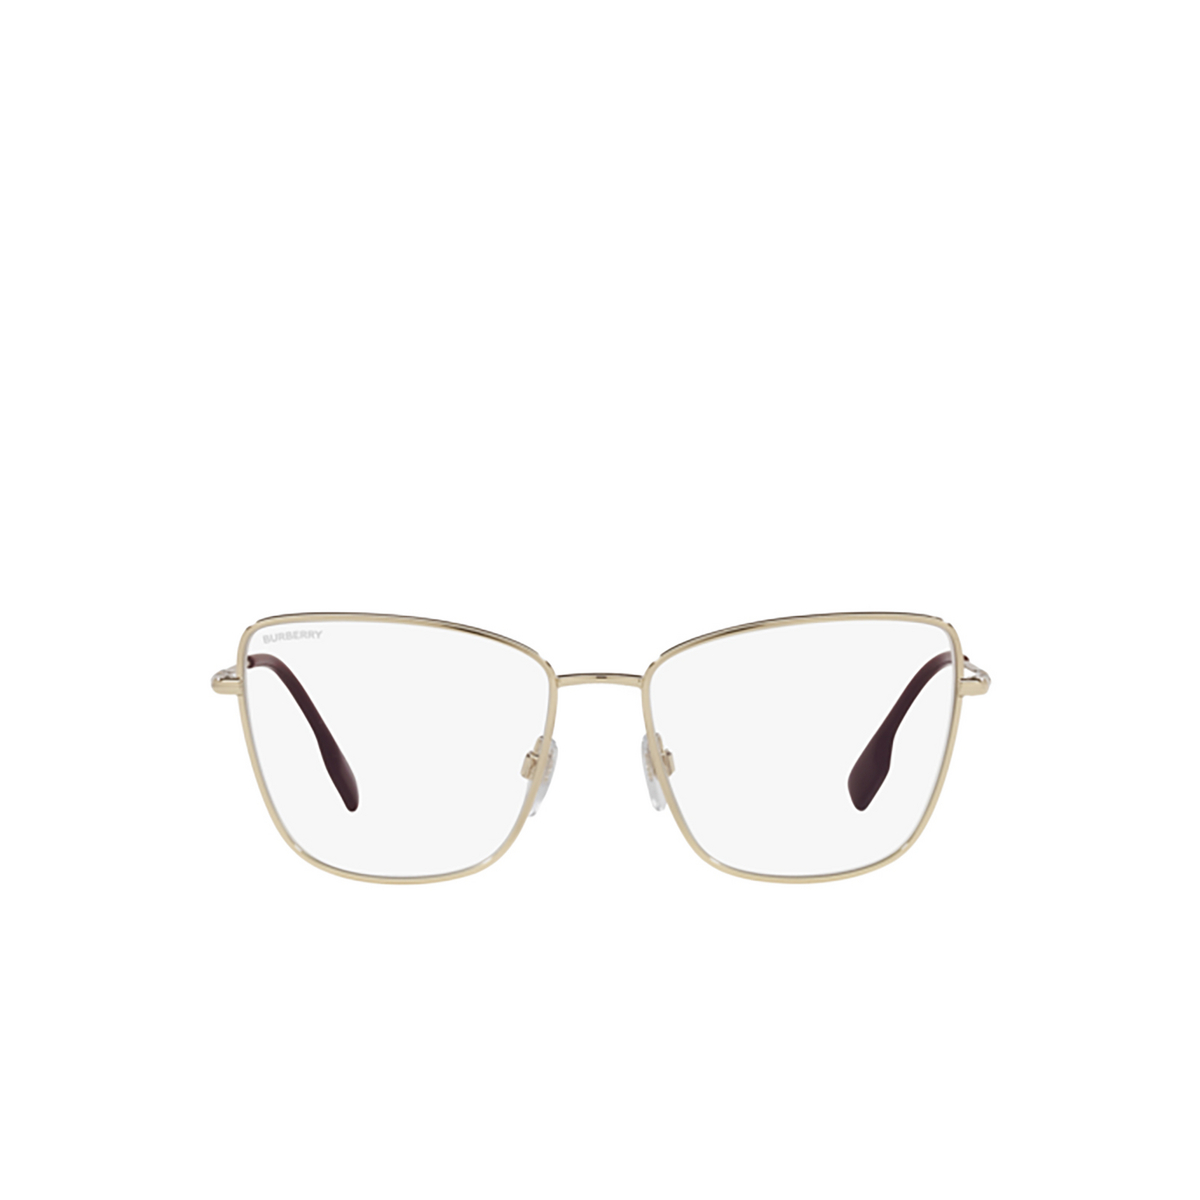 Burberry BEA Eyeglasses 1339 Light Gold - front view